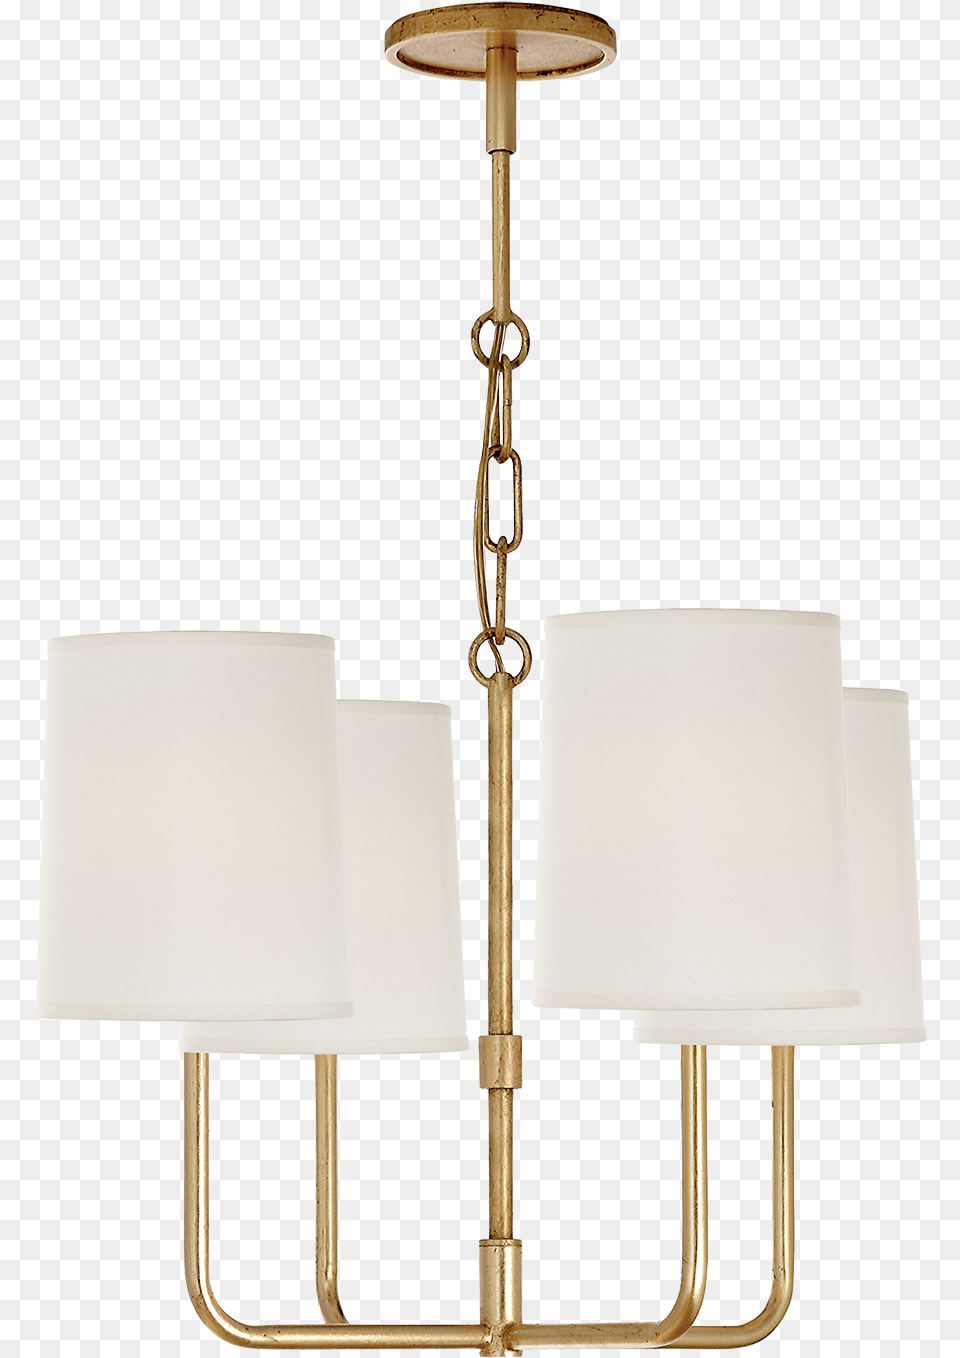 Go Lightly Small Chandelier Gold Chandelier, Lamp, Light Fixture, White Board Free Png Download